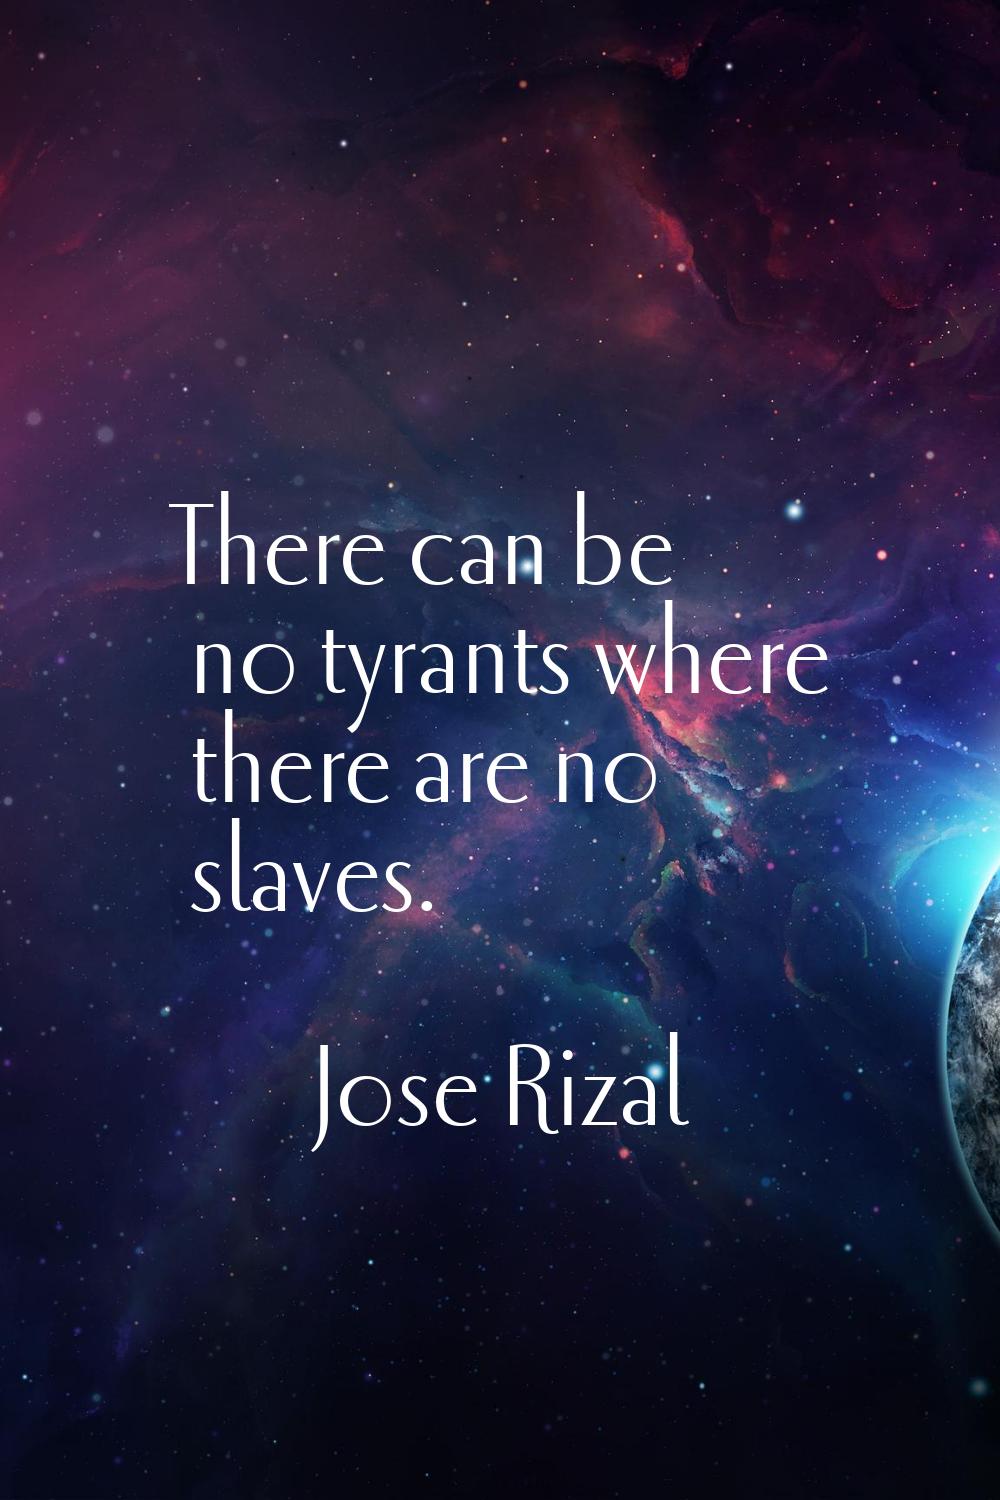 There can be no tyrants where there are no slaves.